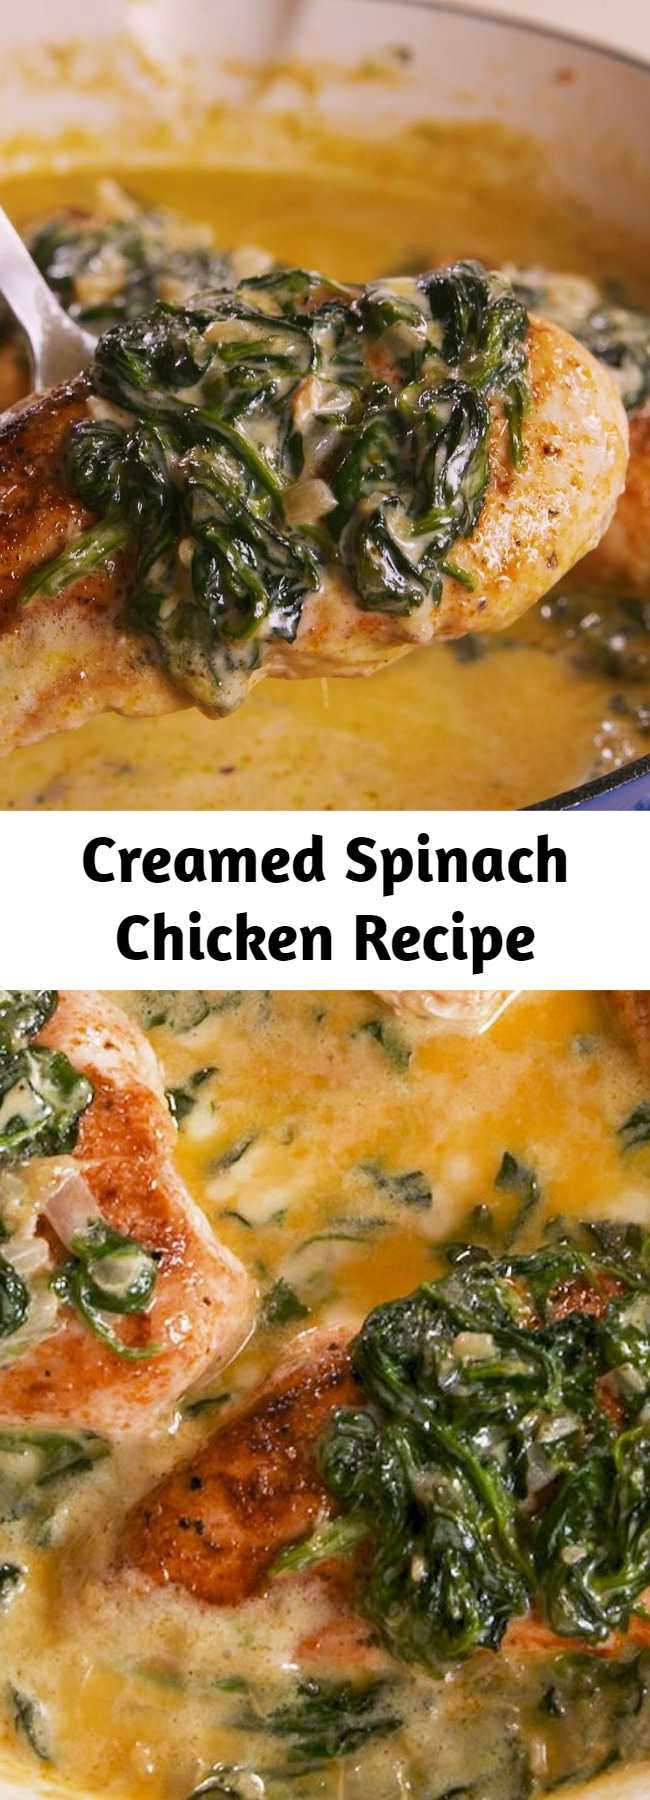 Creamed Spinach Chicken Recipe - You'll be eating straight out of the pan. #food #easyrecipe #chickenrecipe #onepot #dinner